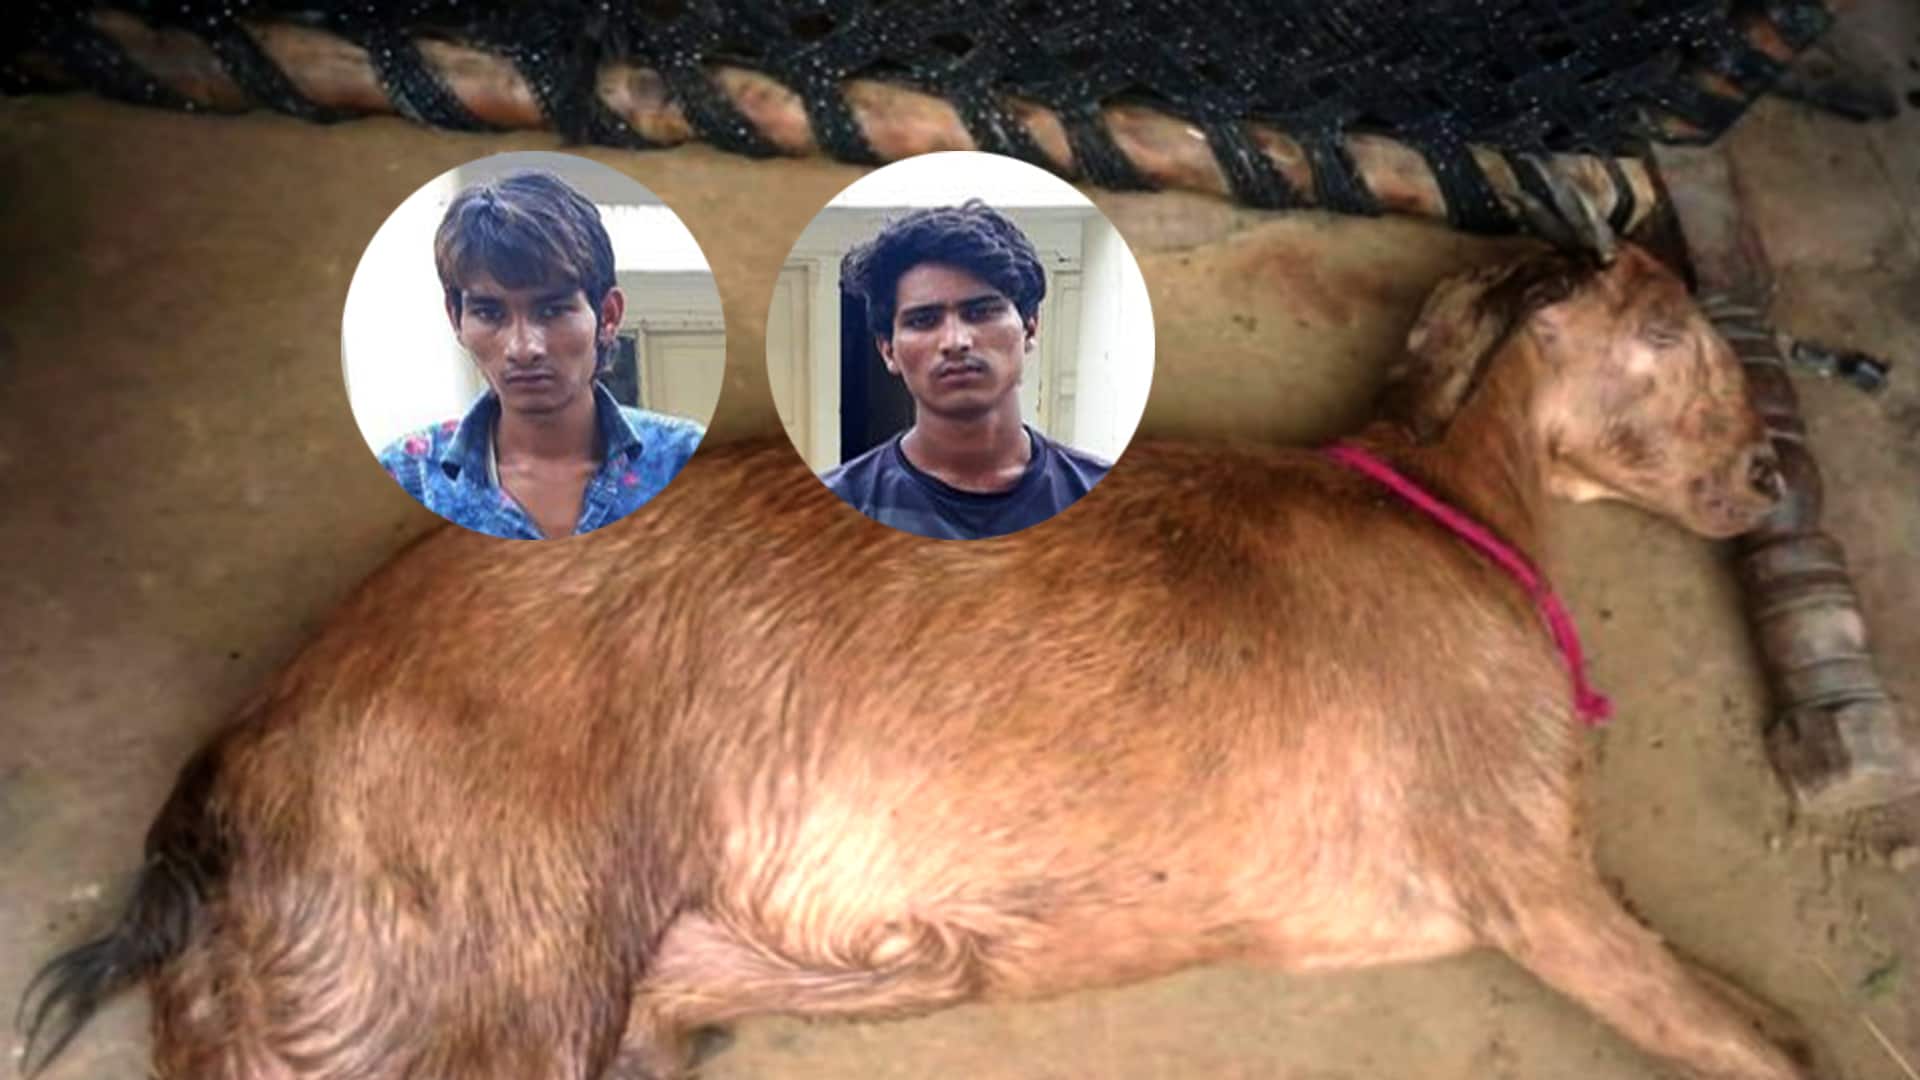 Police arrest two of the 8 men accused of raping goat in Mewat